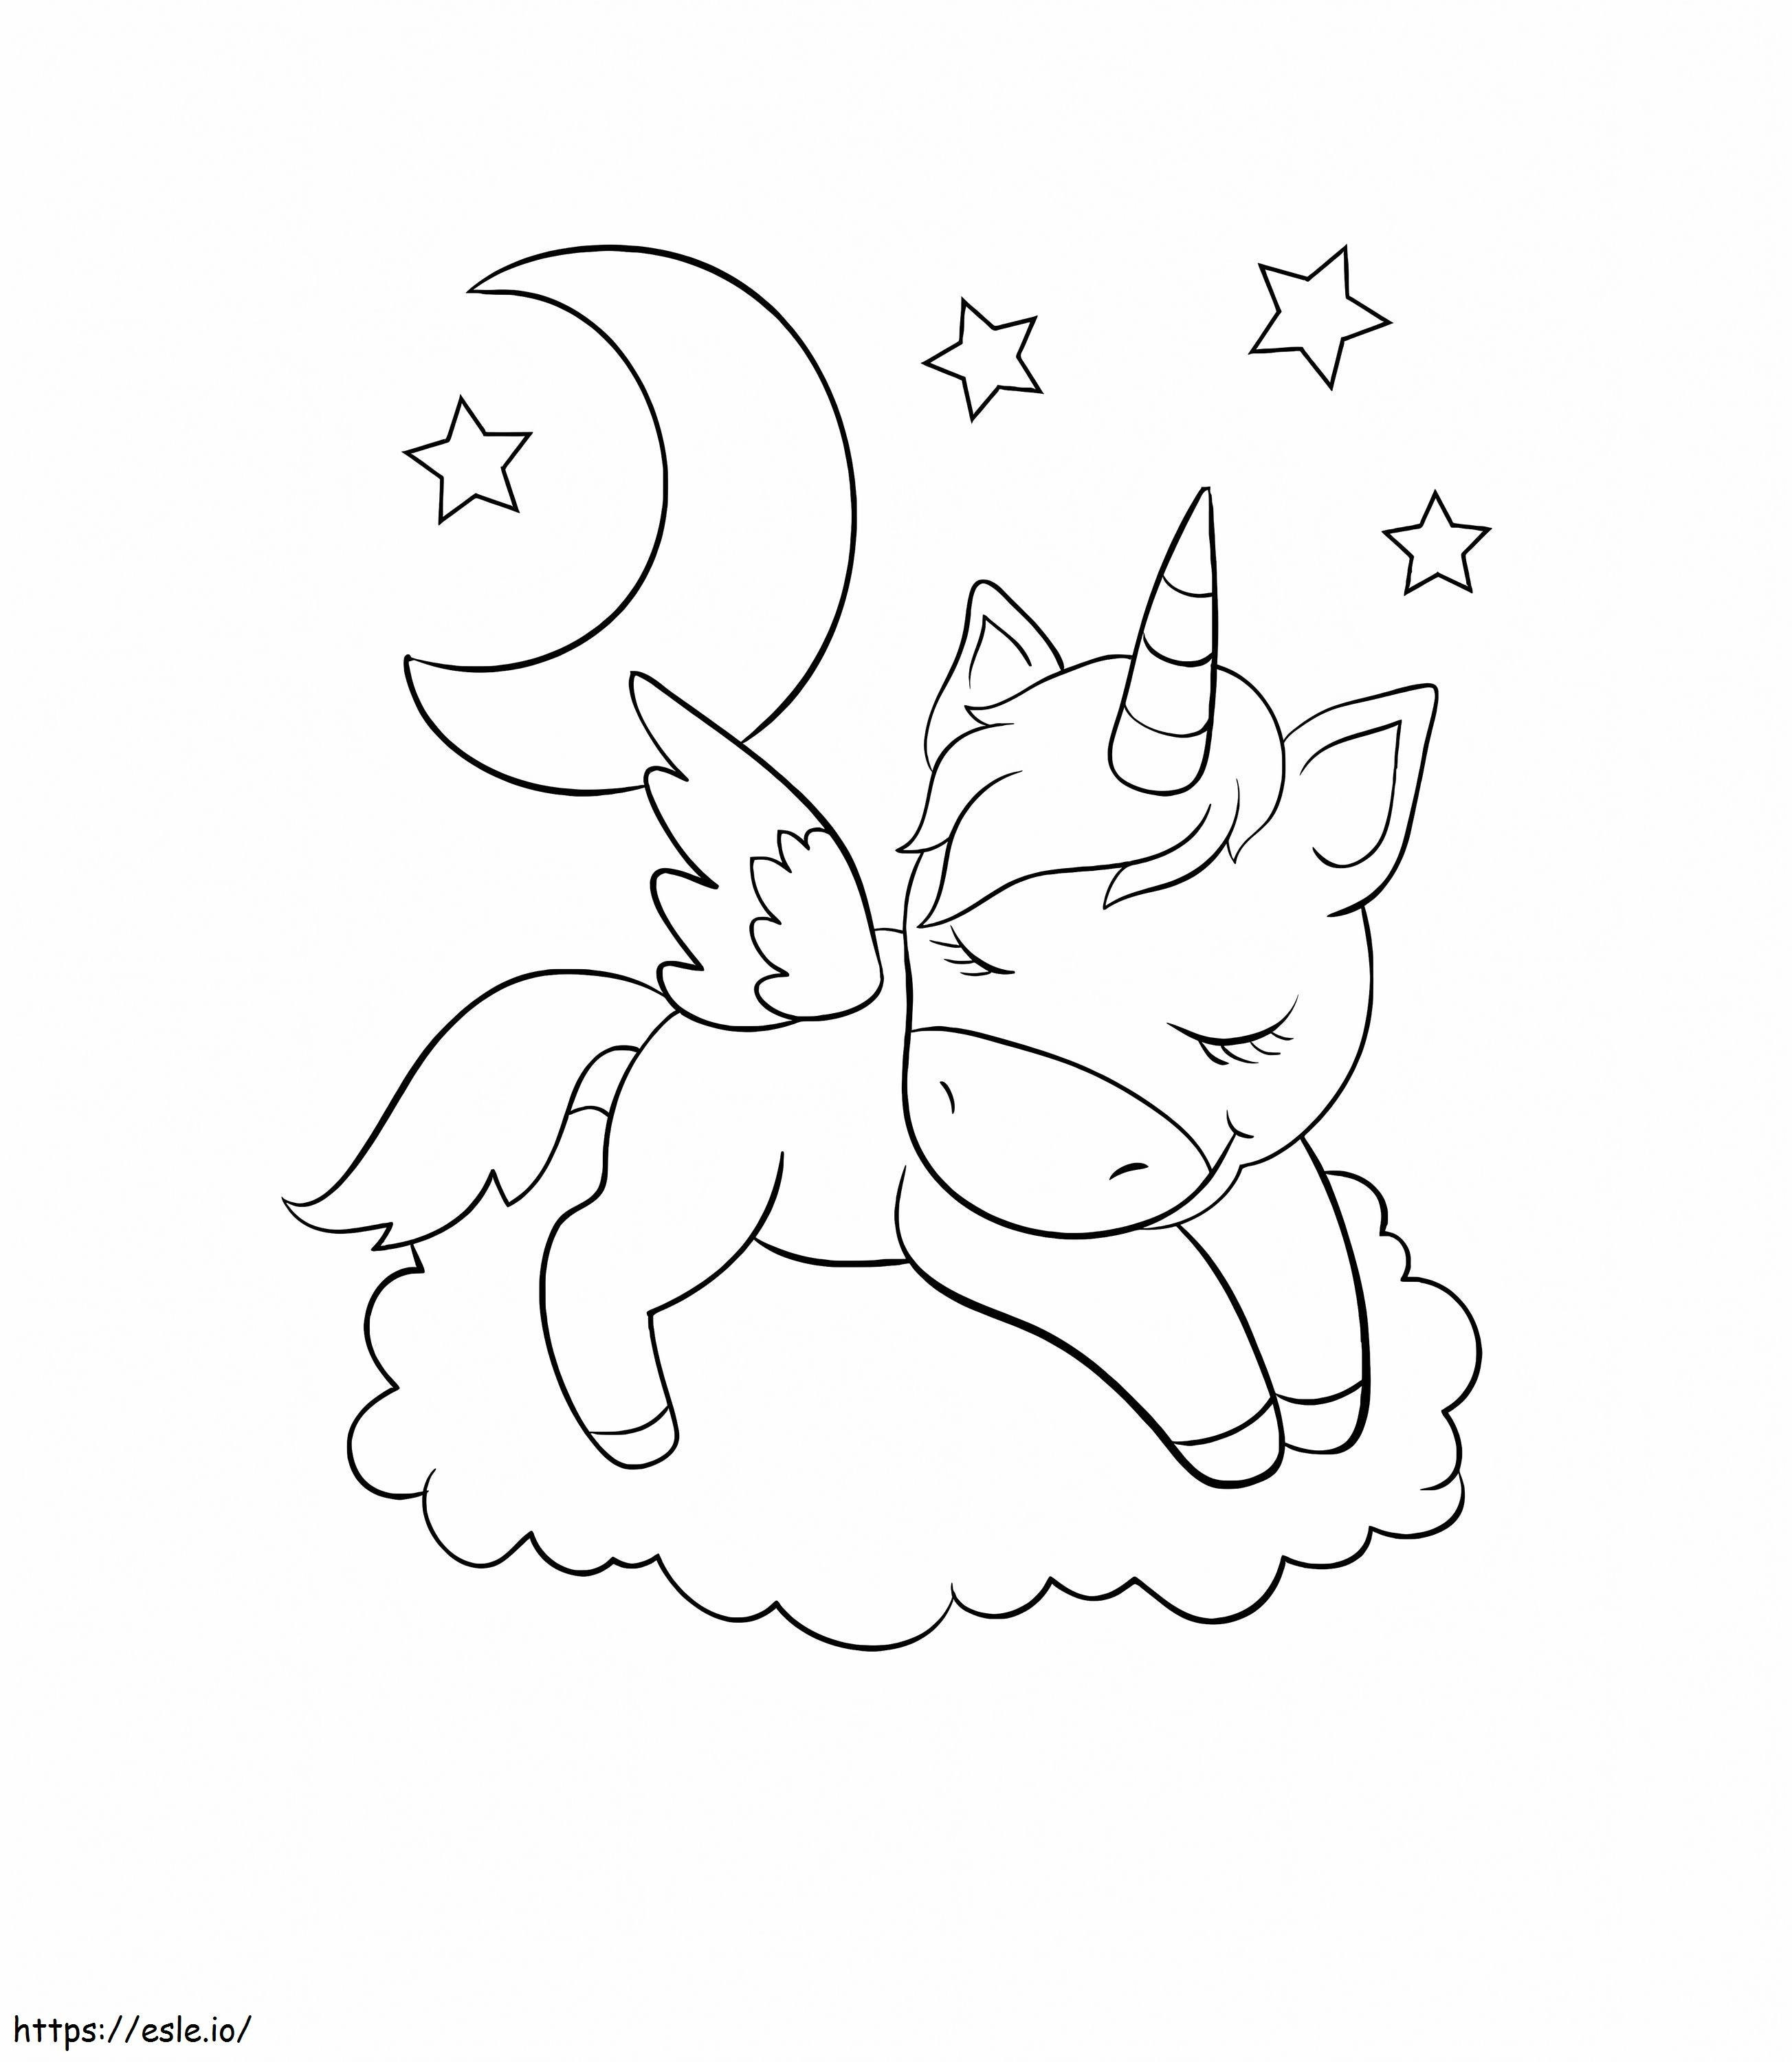 Unicorn Sleeping On A Cloud coloring page